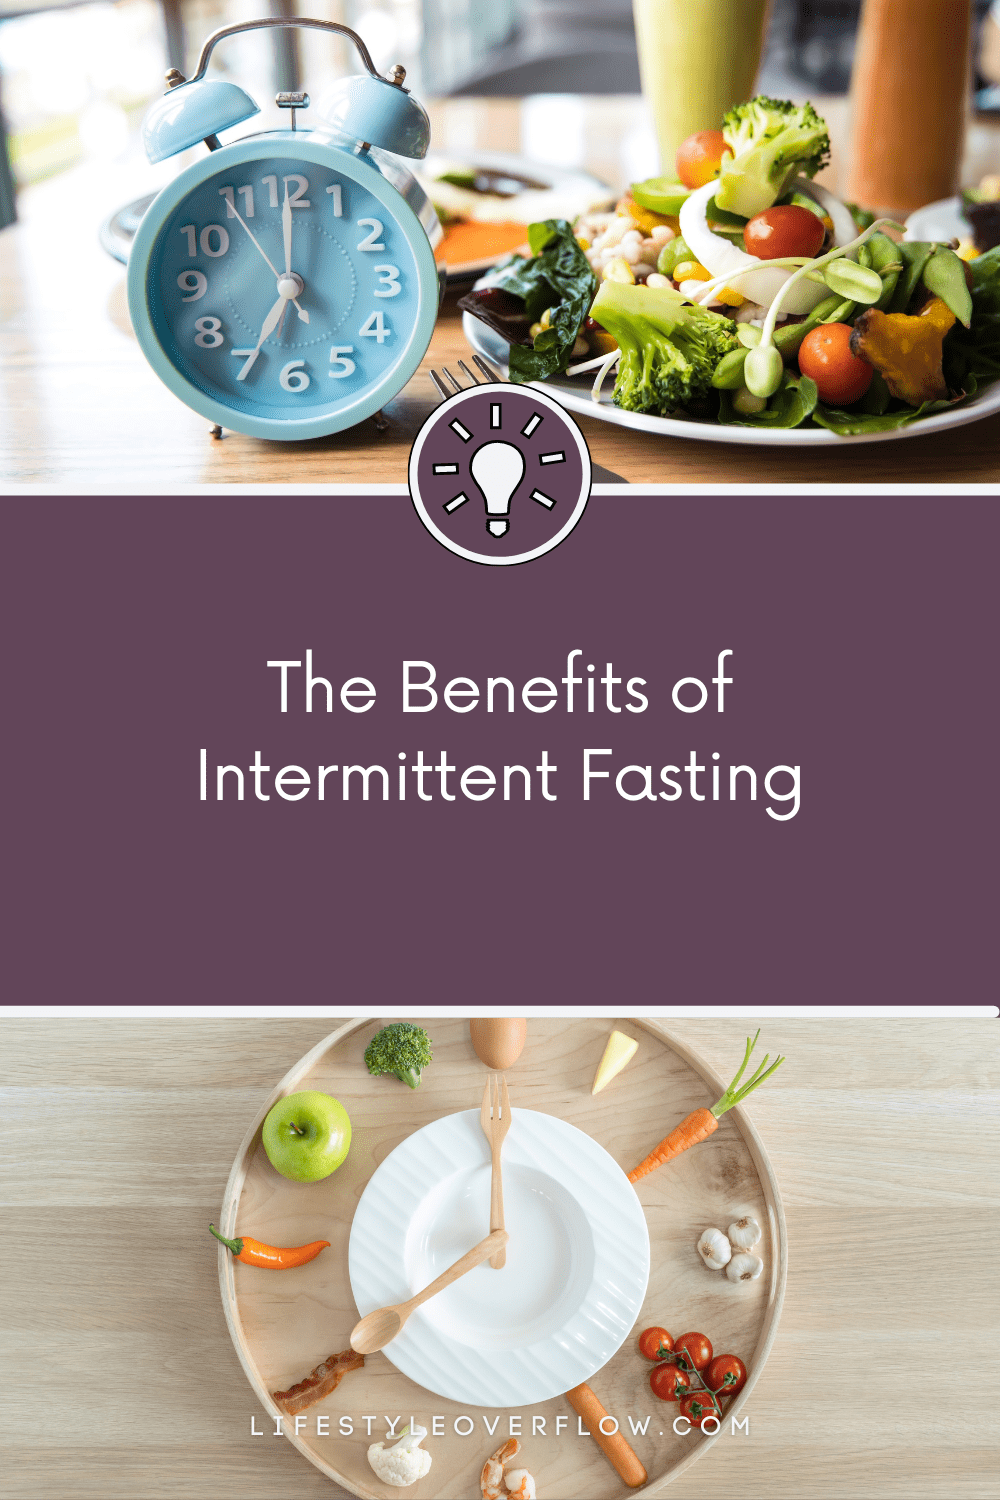 graphic with two photos showing a salad and clock on a table, and a plate/dish with various foods and spoons to look like a clock | purple text box: the benefits of Intermittent Fasting | lifestyleoverflow.com